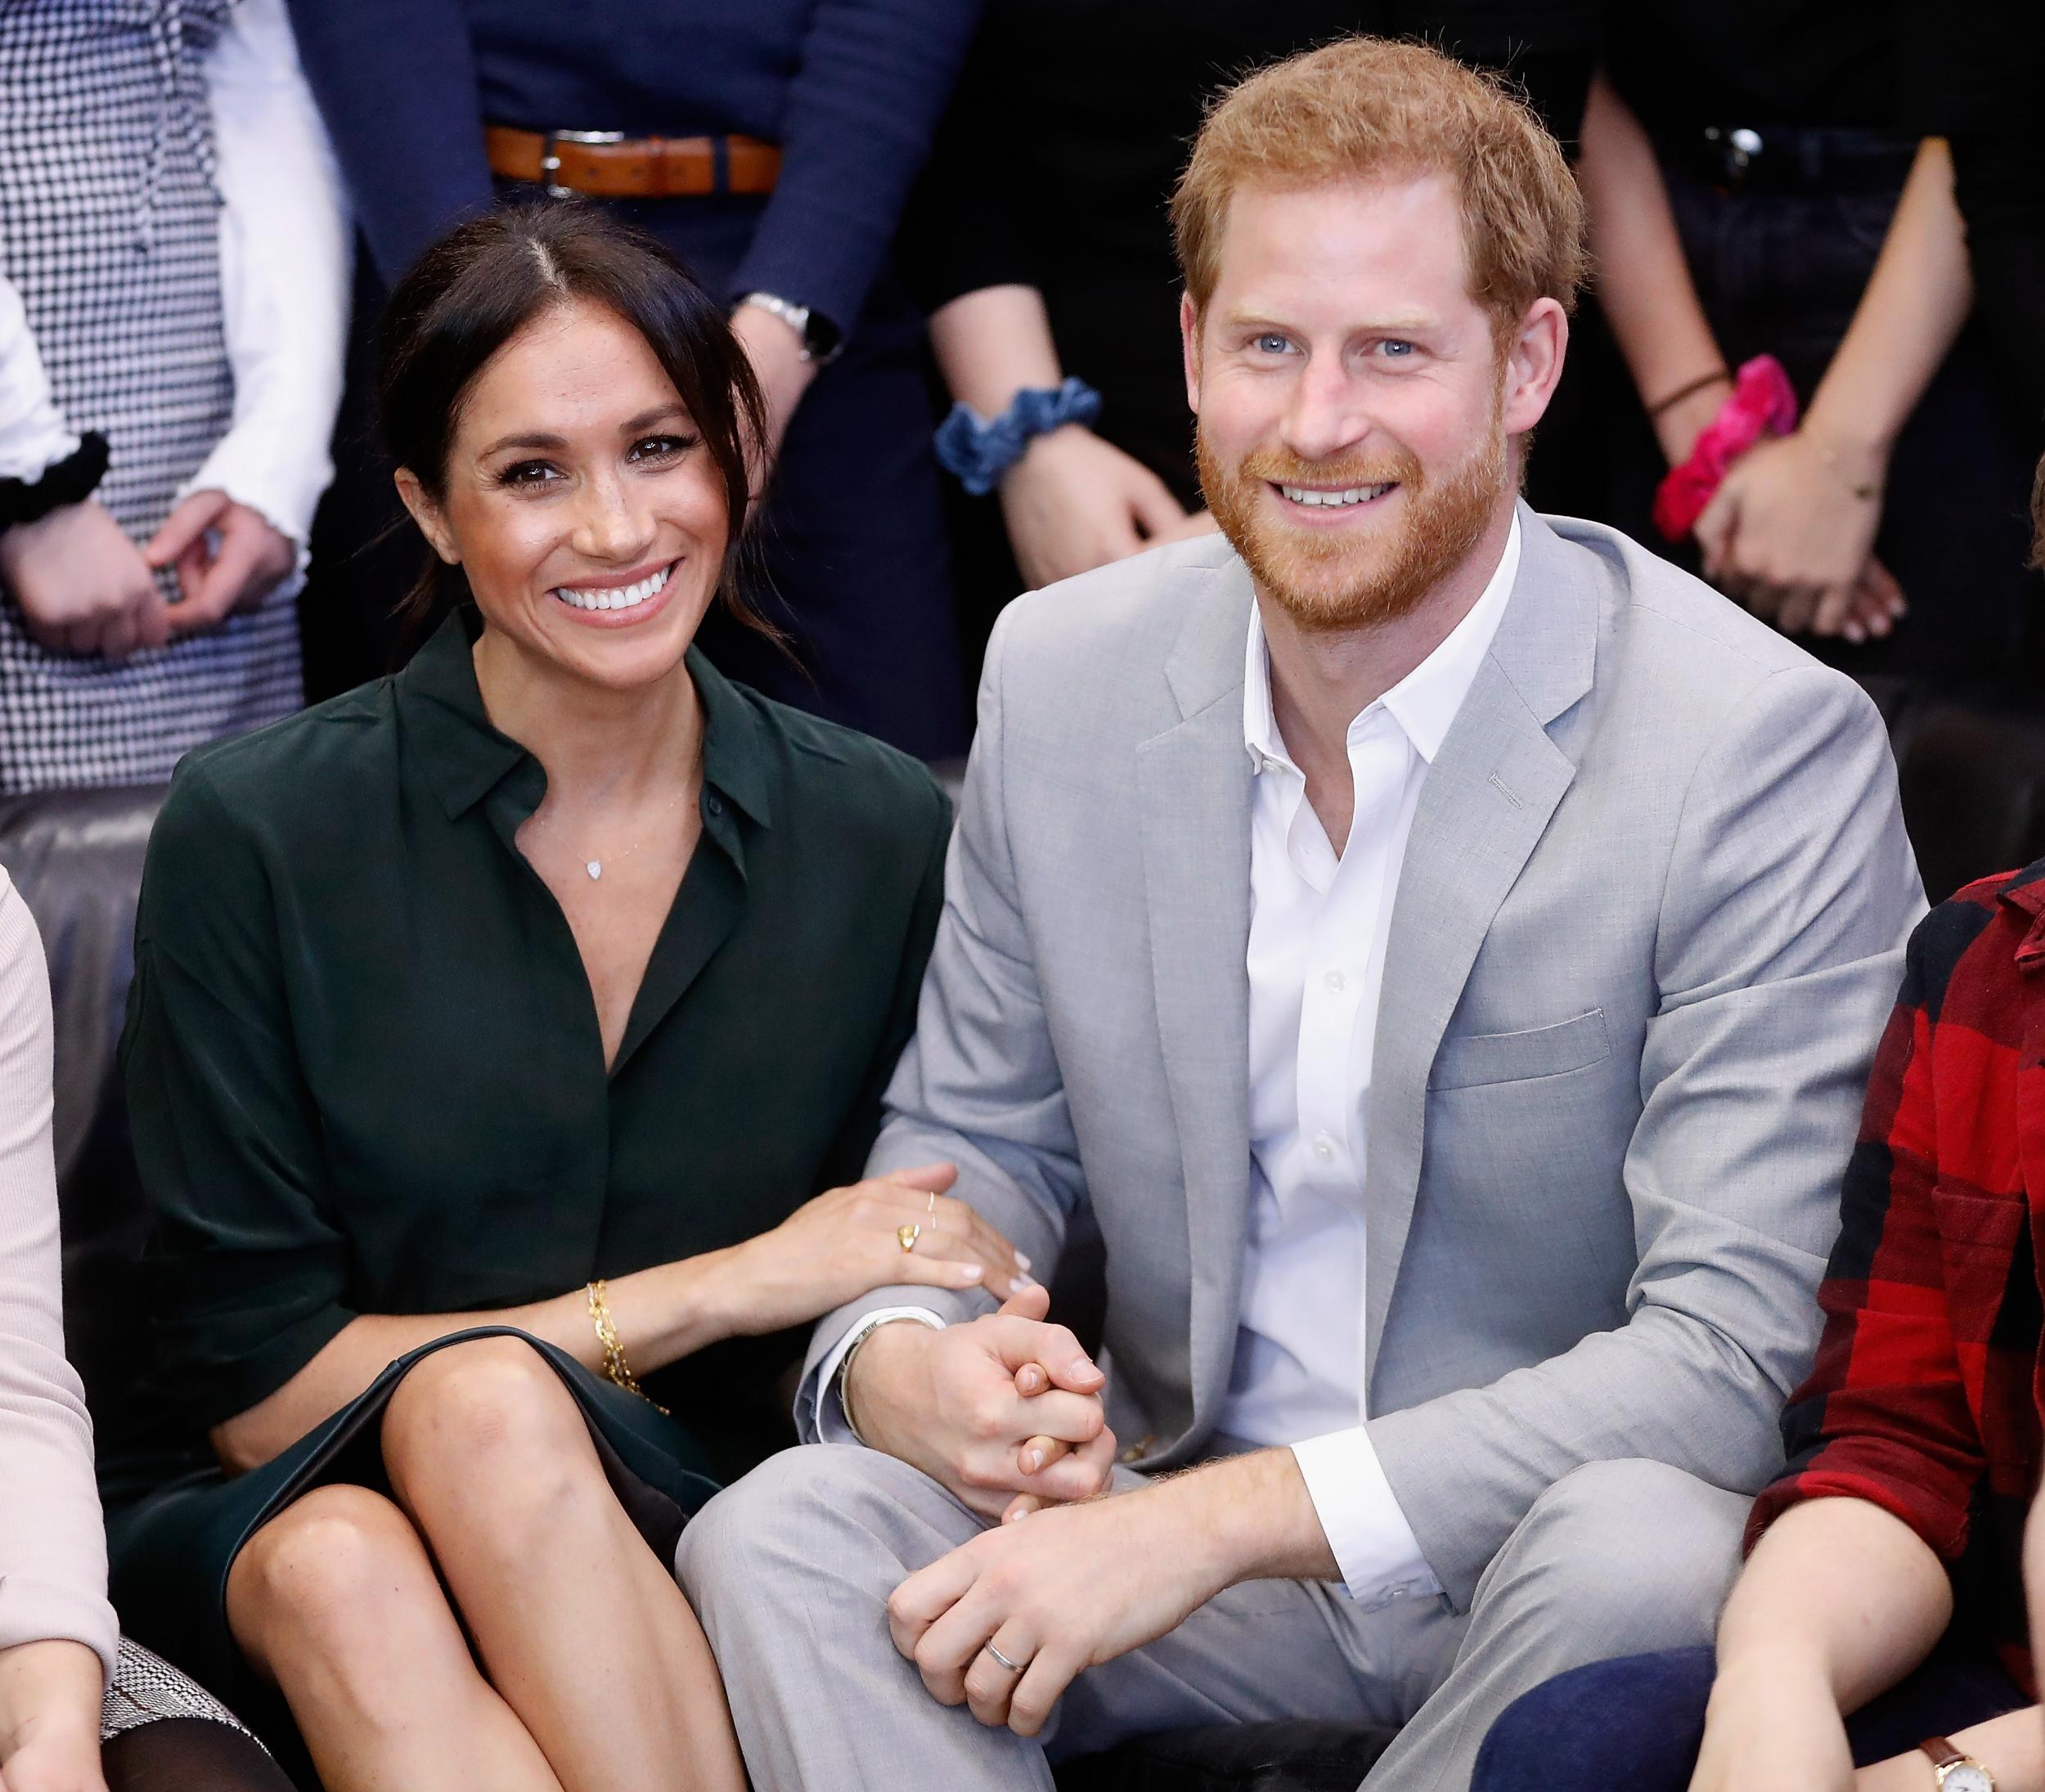 Meghan, Duchess of Sussex and Prince Harry, Duke of Sussex announce they are expecting their first child.